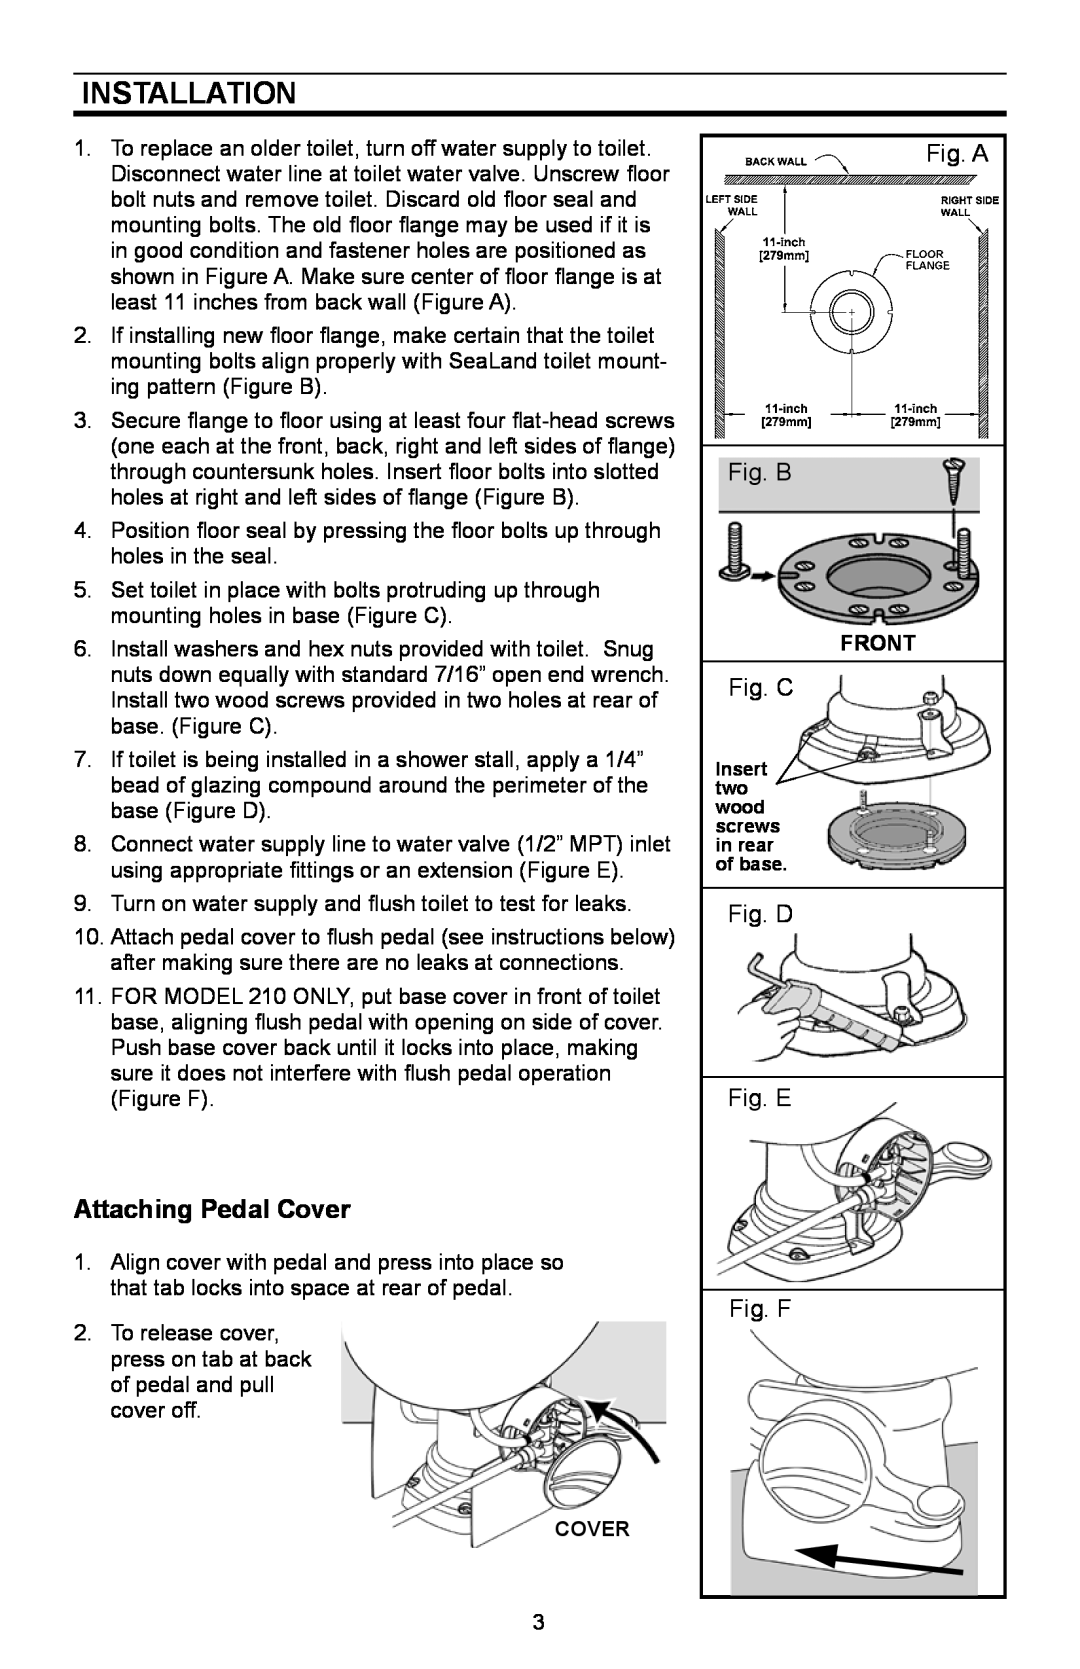 Dometic 210, 110 owner manual Installation, Attaching Pedal Cover, Fig. A Fig. B, Fig. C, Fig. D Fig. E Fig. F 